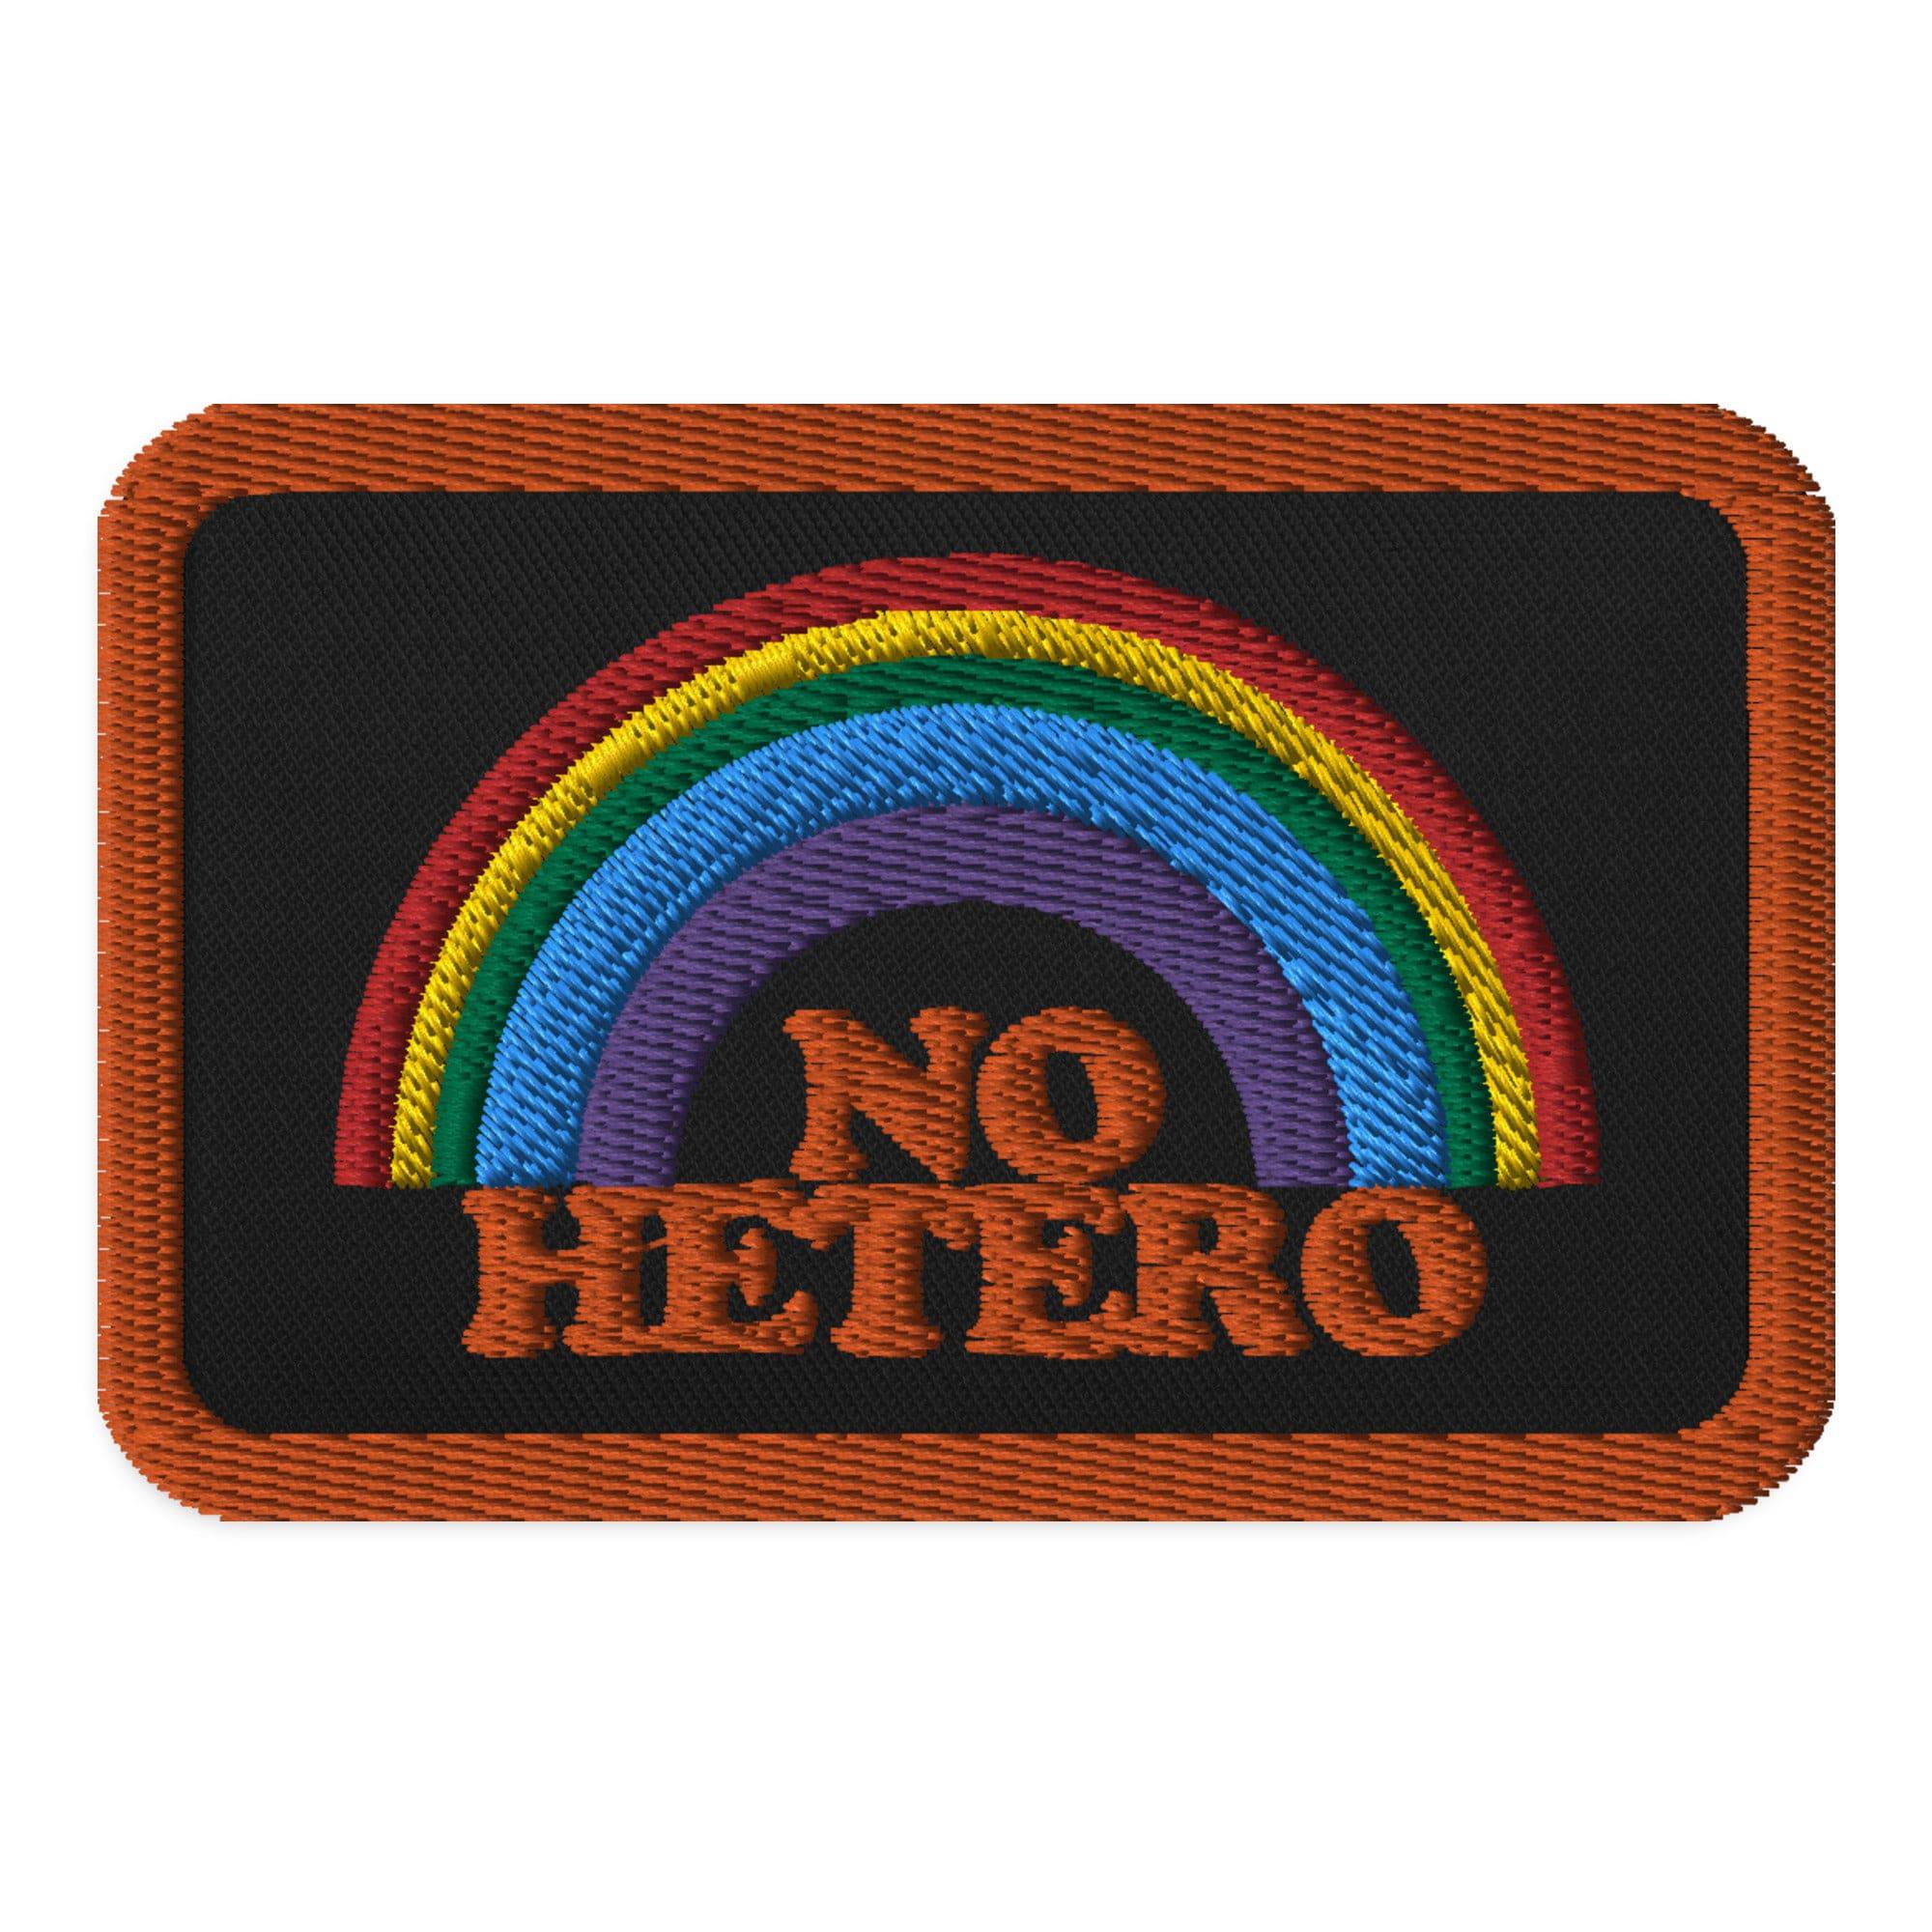 No Hetro Gay Pride Embroidered patch - Rose Gold Co. Shop